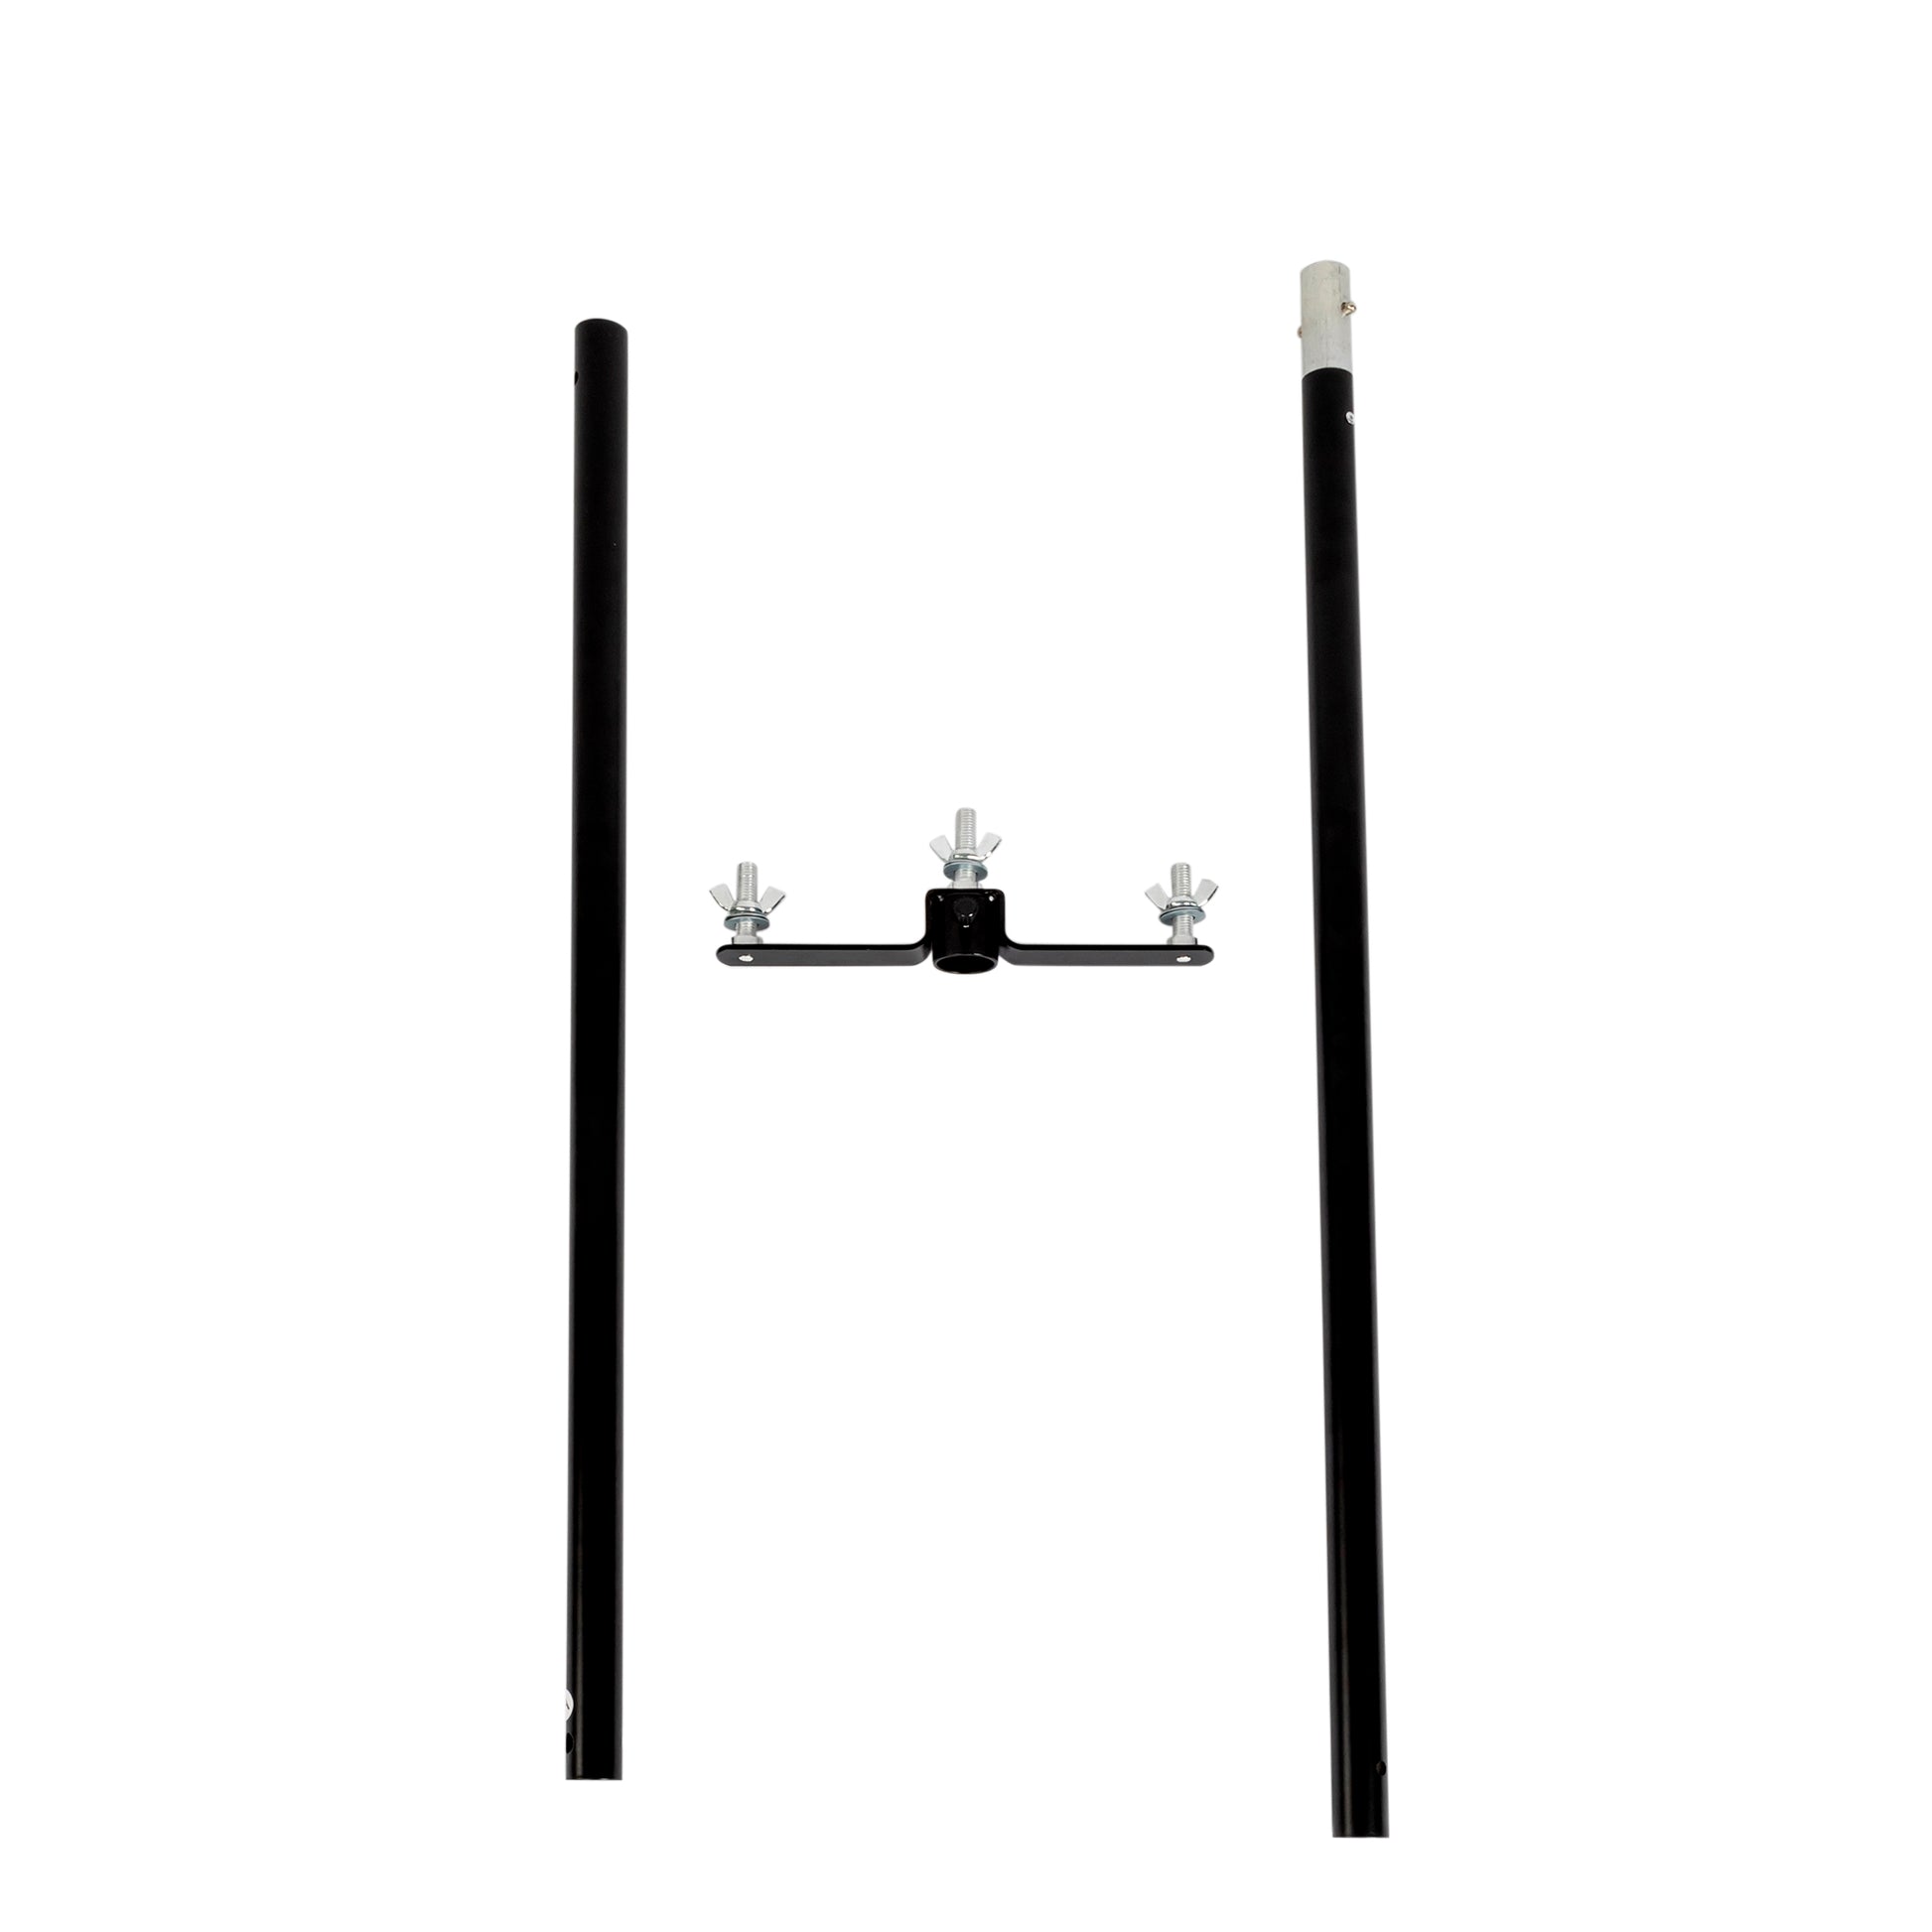 2 Crossbars with Bracket for Backdrop Stand (Add on Feature)